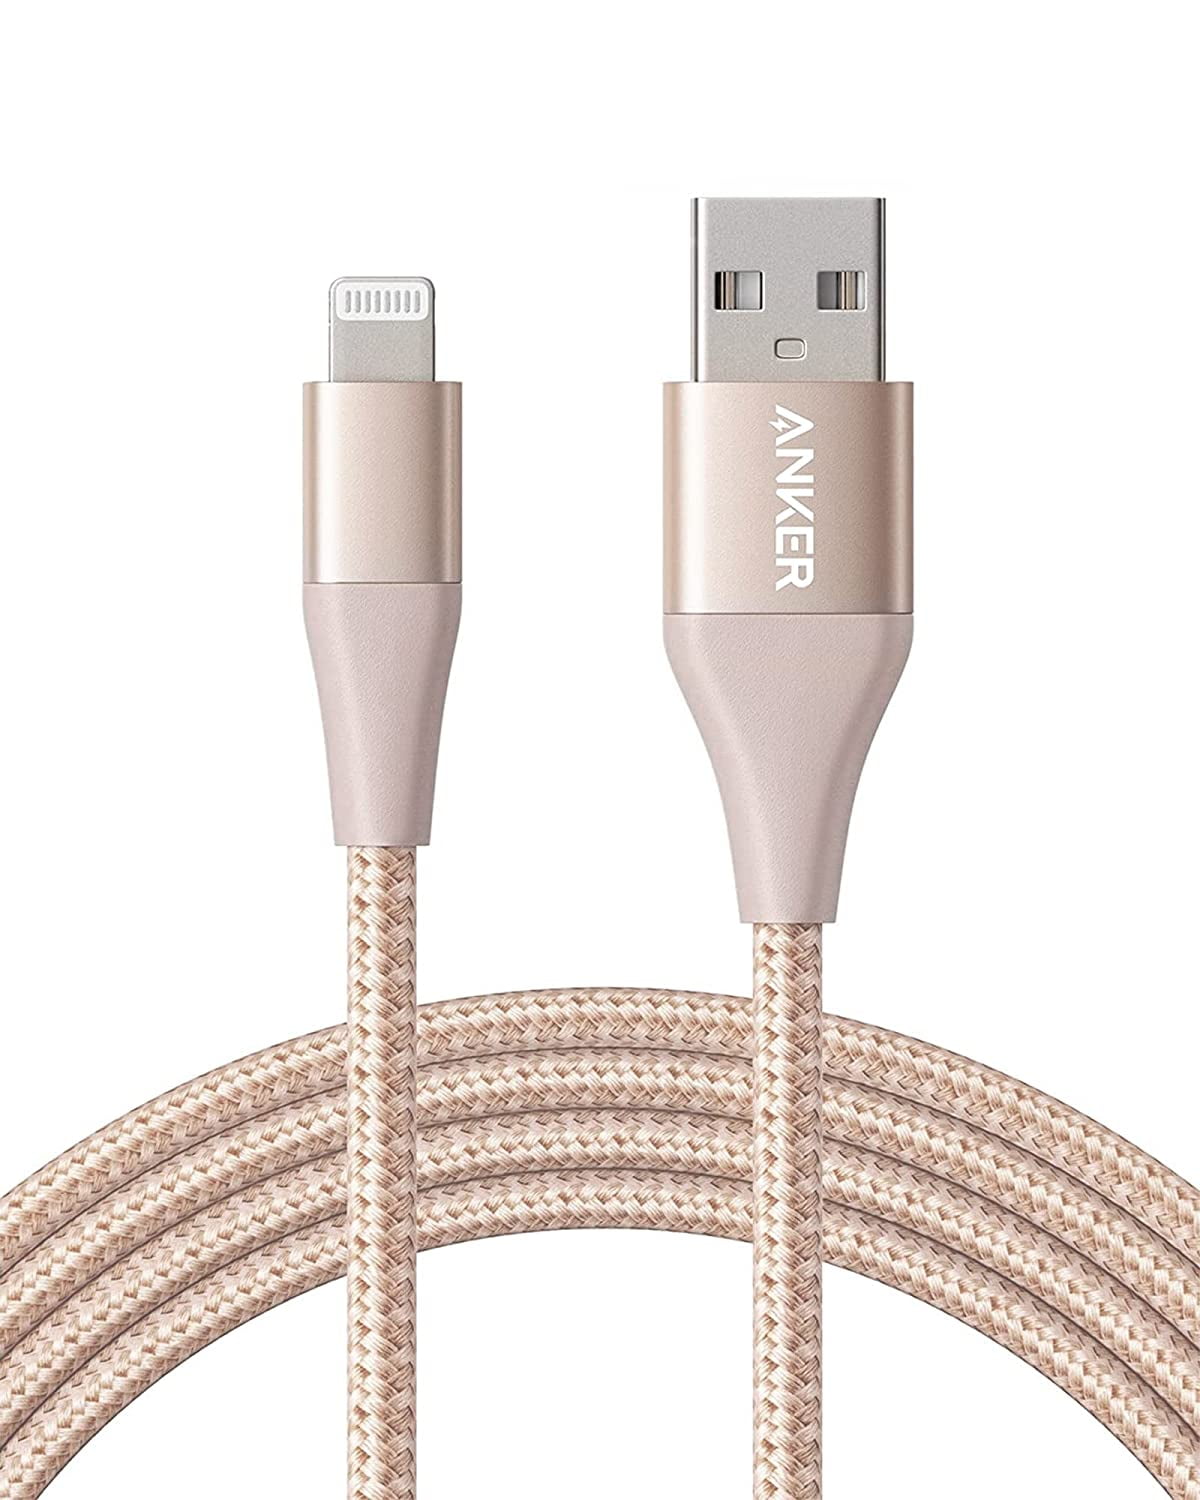 Anker Powerline+ Lightning Cable Durable and Fast Charging Cable MFi Certified for iPhone X / 8/8 Plus / 7/7 Plus / 6/6 Plus / 5s / iPad and More 10ft White Double Braided Nylon 